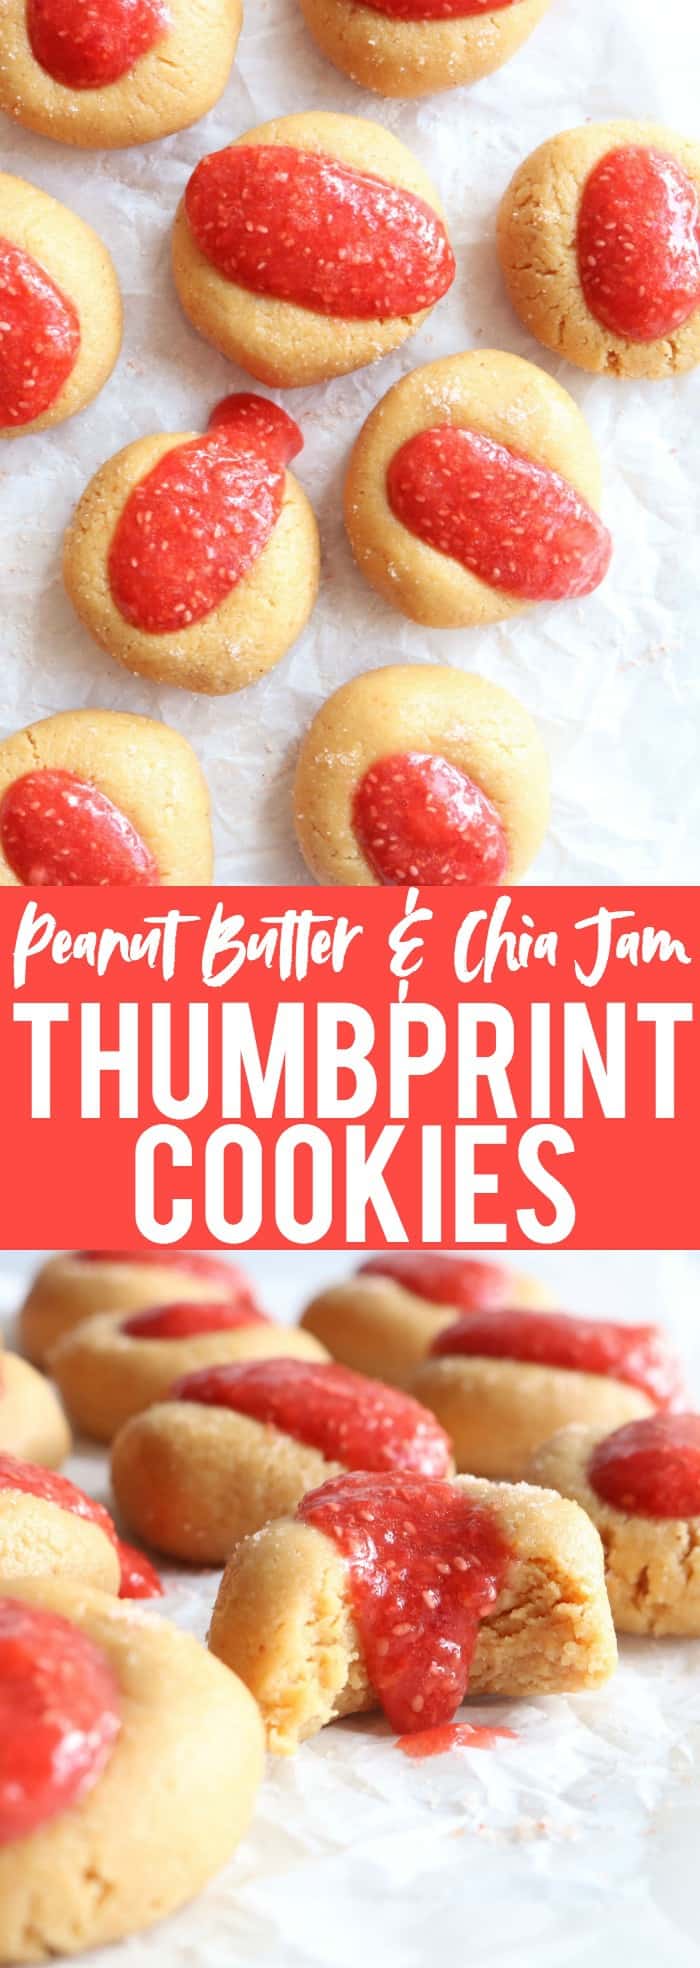 Really fun and delicious gluten free + vegan Peanut Butter + Chia Jam Thumbprint Cookies!! They taste like a PB&J sandwich but BETTER!! thetoastedpinenut.com #vegan #glutenfree #cookies #thumbprintcookies #dessert